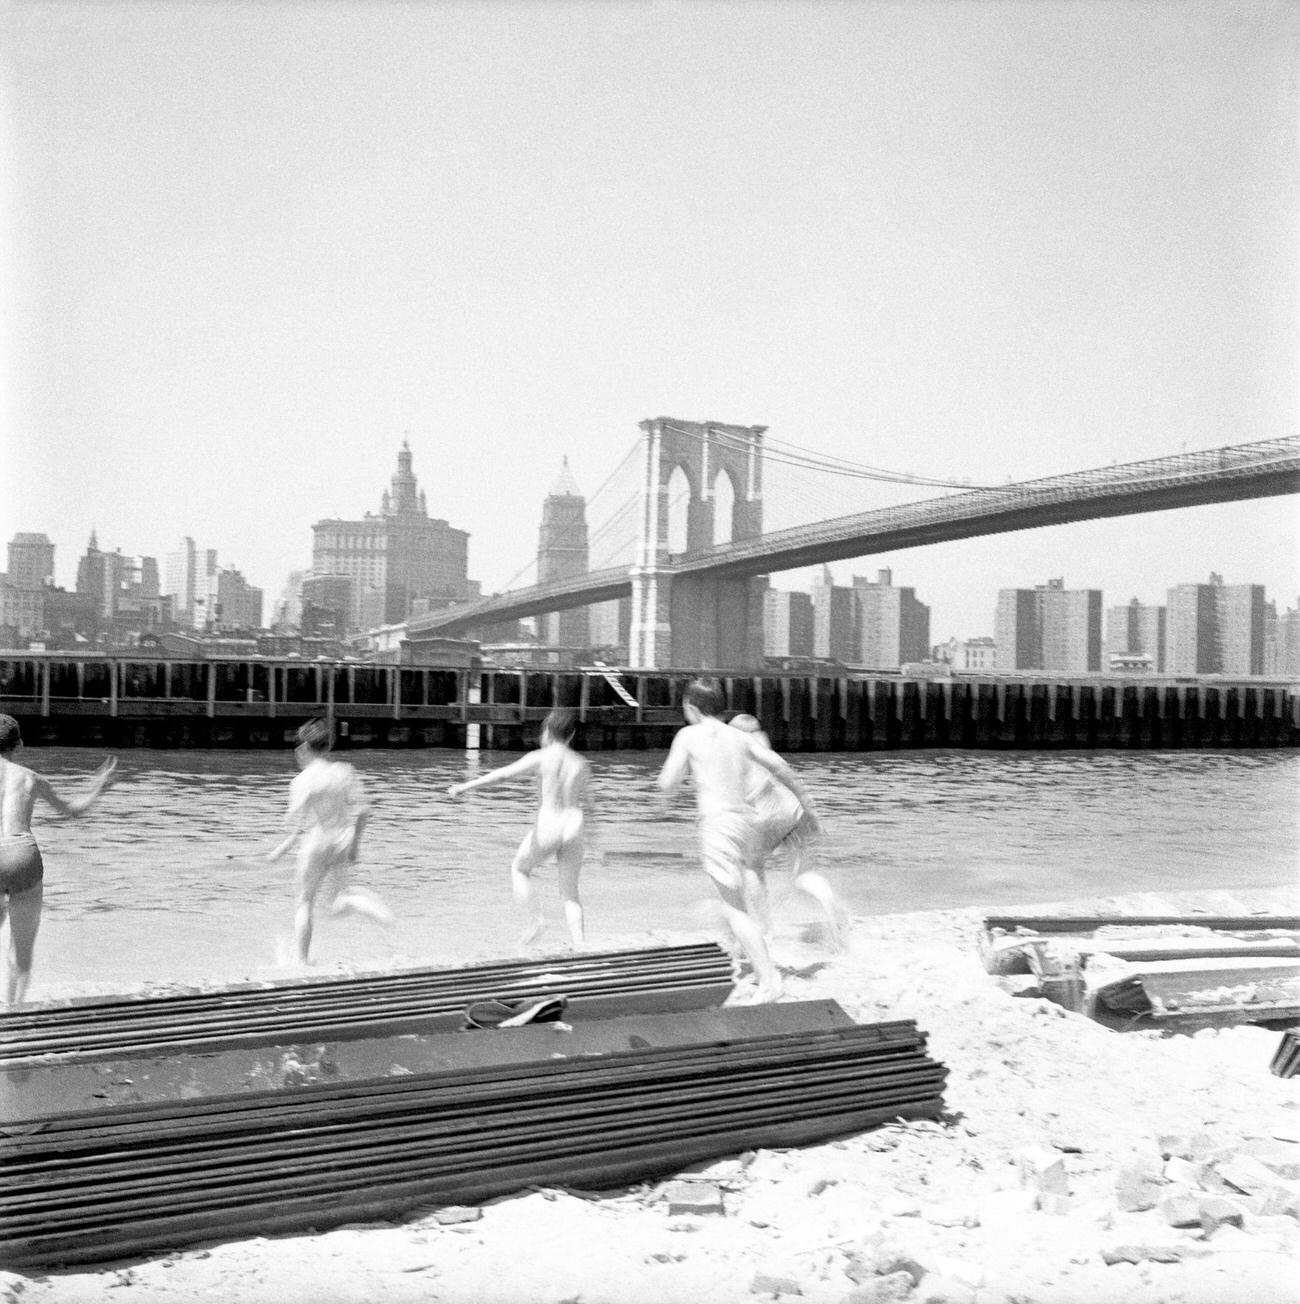 Kids Swim In The East River With Brooklyn Bridge In The Background, 1958.